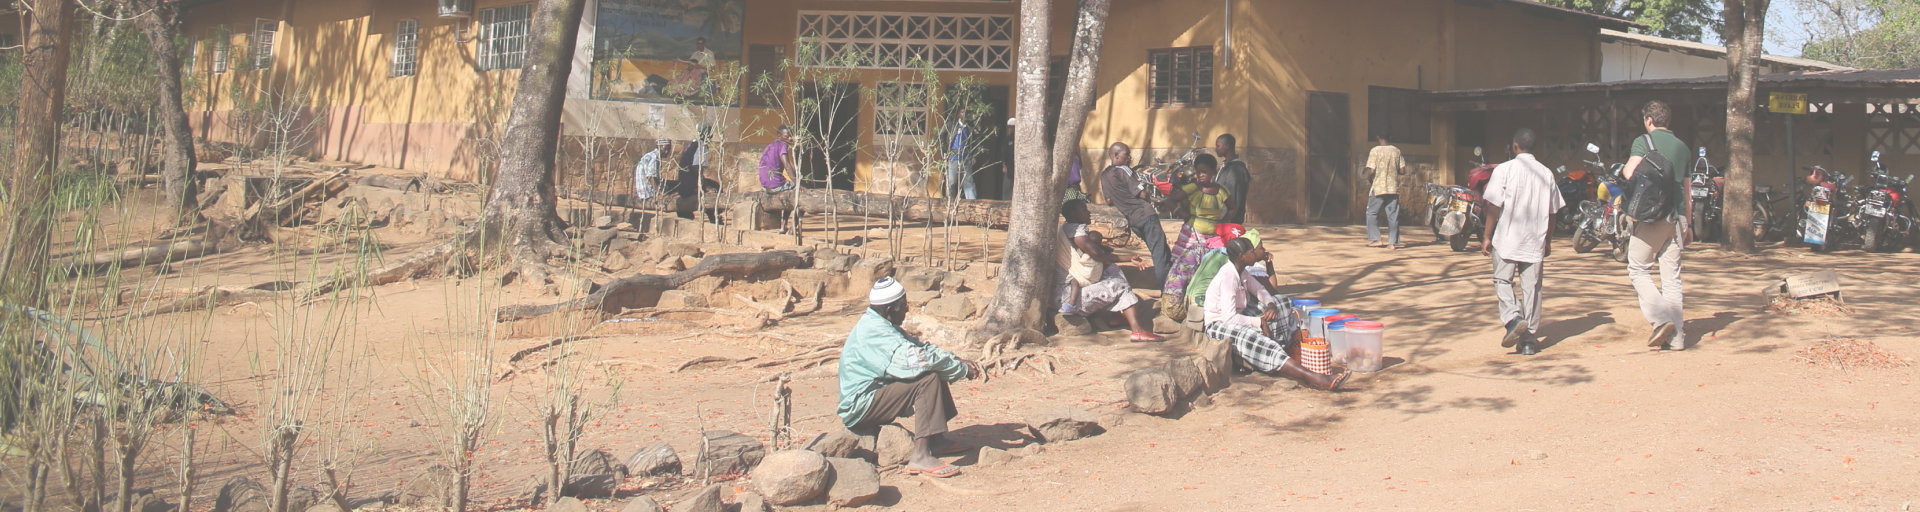 Rural scene in africa with people sat down